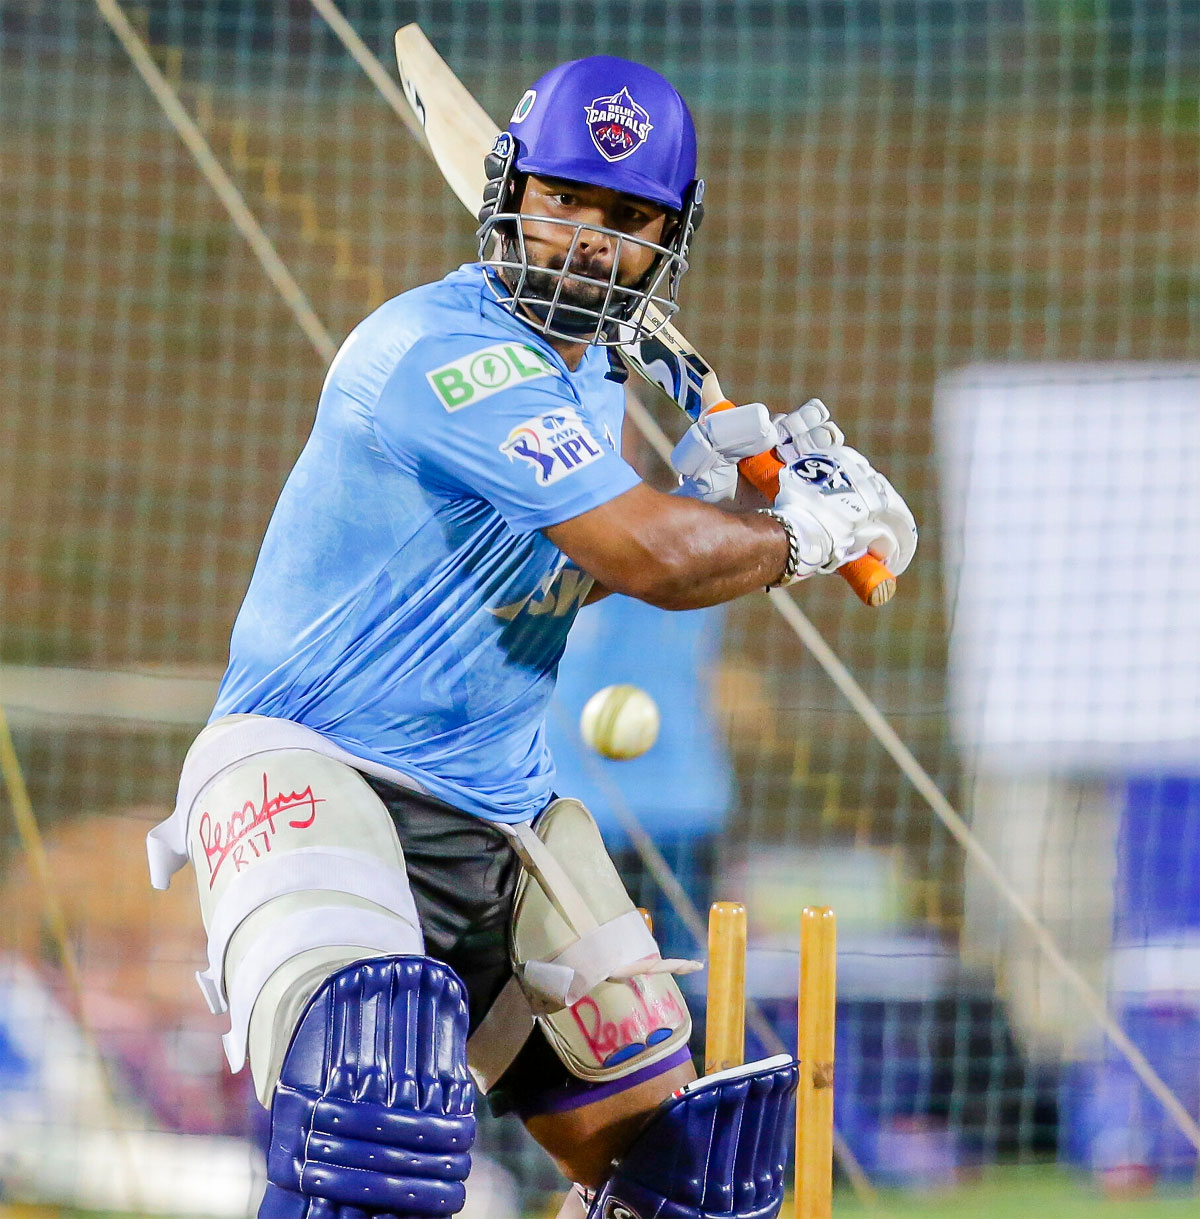 Rishabh Pant will be returning to cricket after a long rehab programme